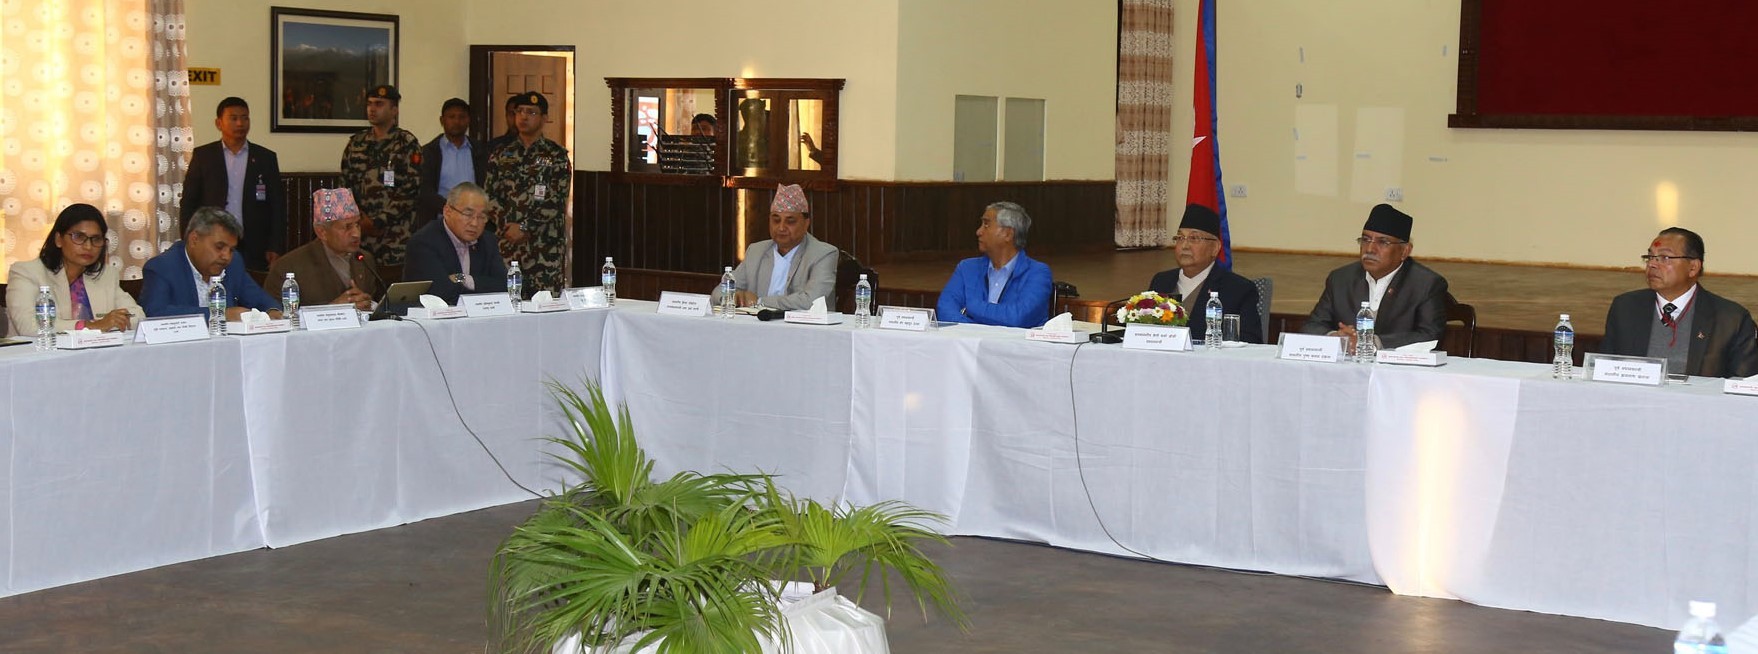 all-party-meeting-begins-in-baluwatar-to-discuss-border-issues